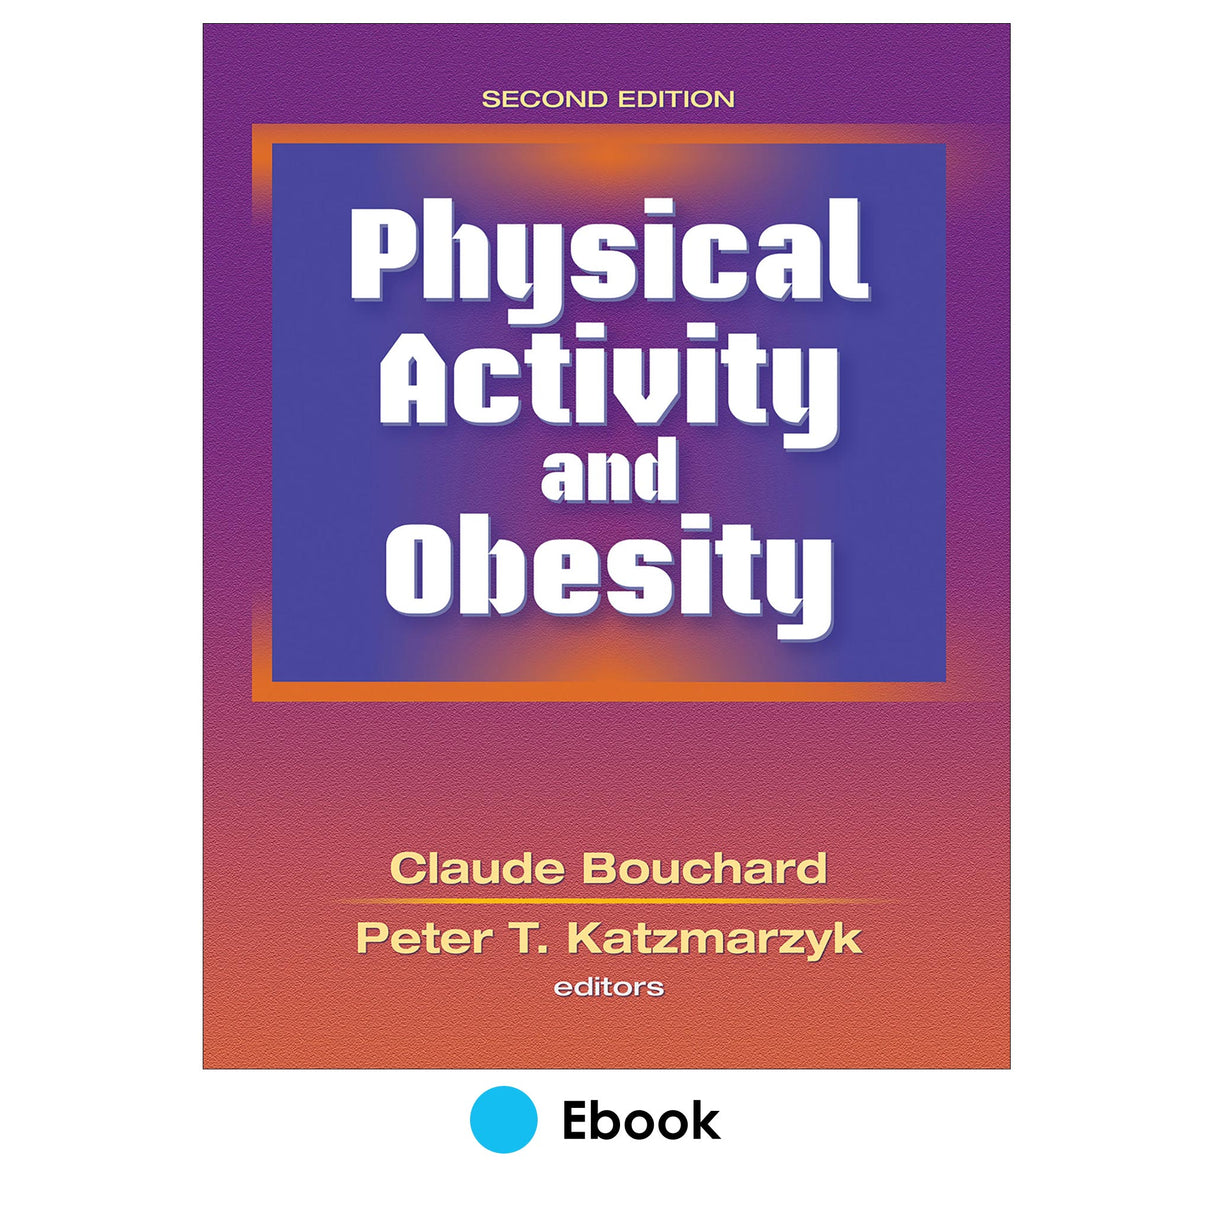 Physical Activity and Obesity 2nd Edition PDF